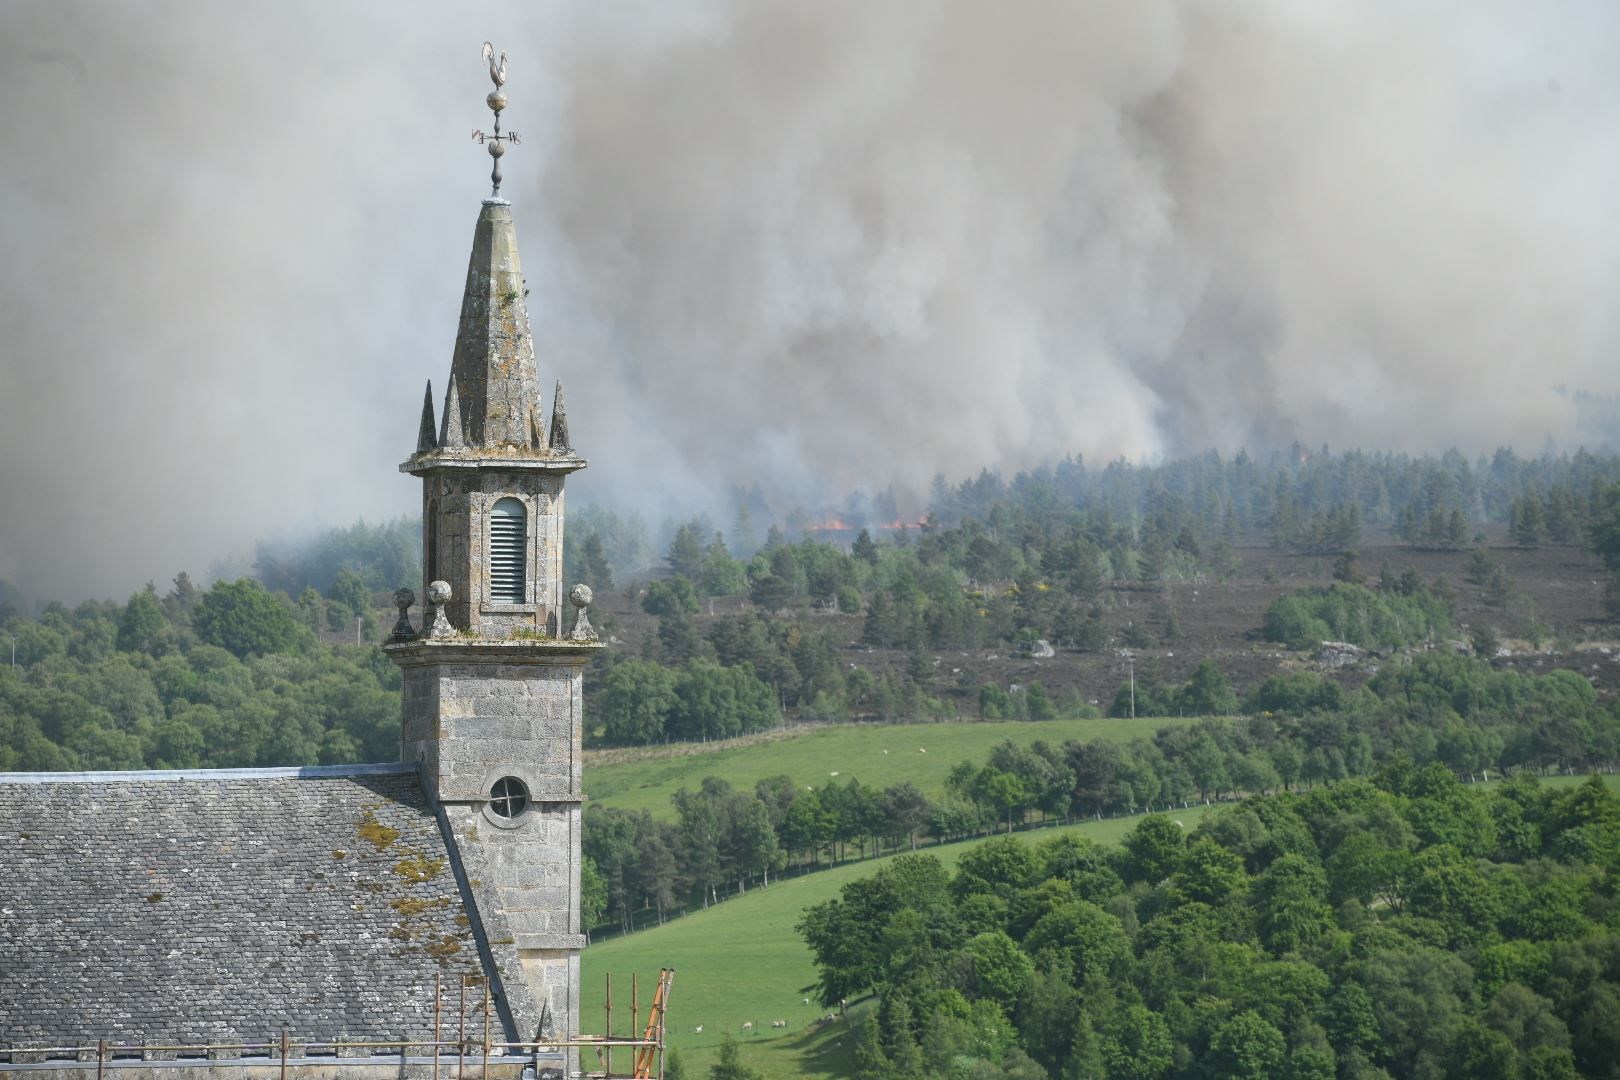 The wildfire has sent a large plume of smoke into the skies south of Inverness.